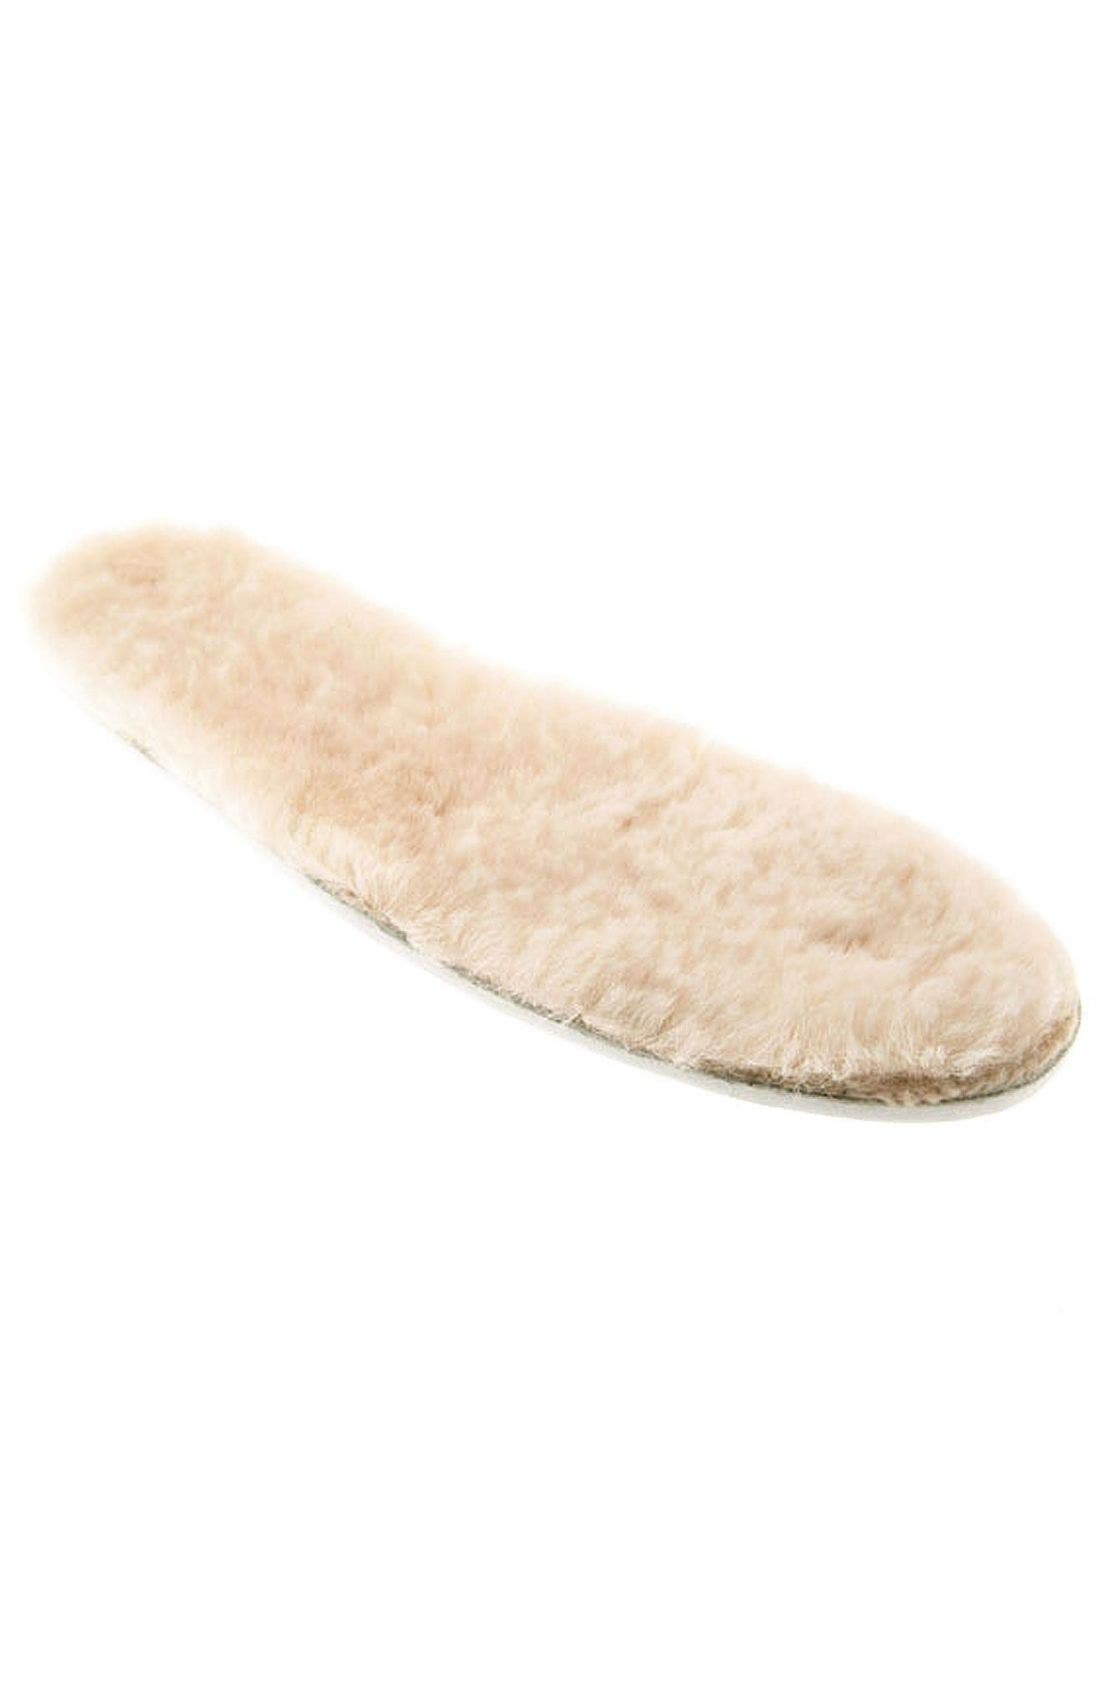 ugg insole replacement mens